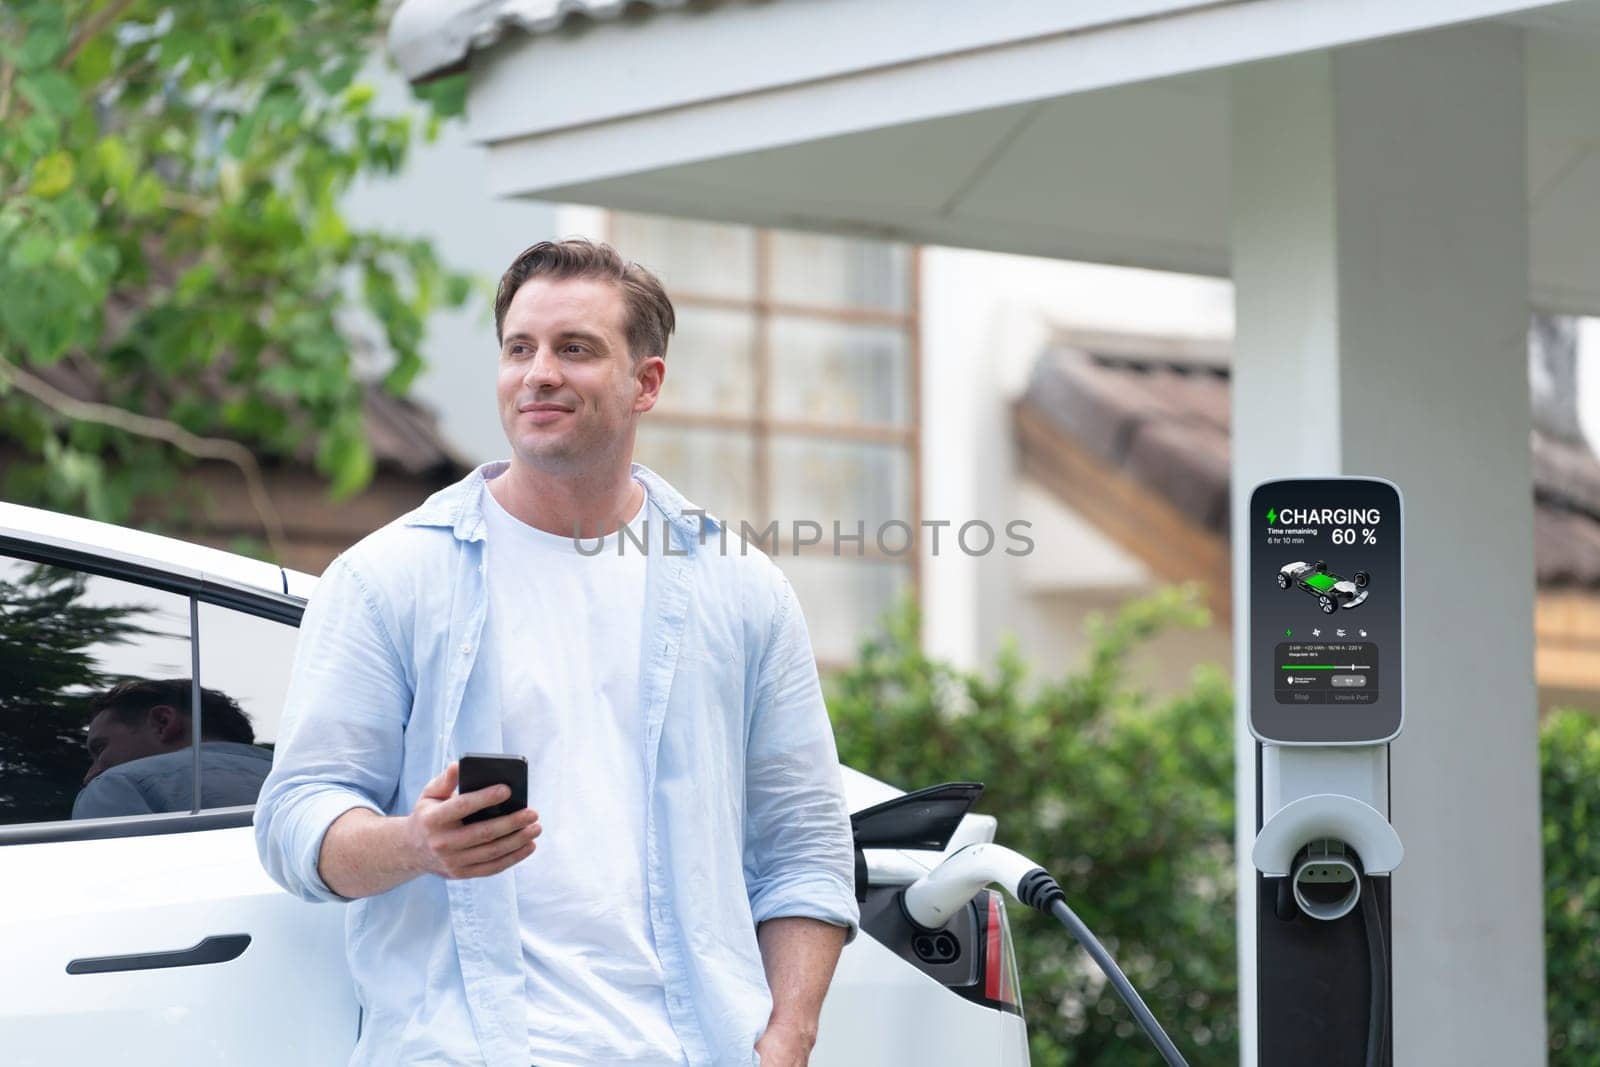 Modern eco-friendly man recharging electric vehicle from home EV charging station. Innovative EV technology utilization for tracking energy usage to optimize battery charging at home. Synchronos